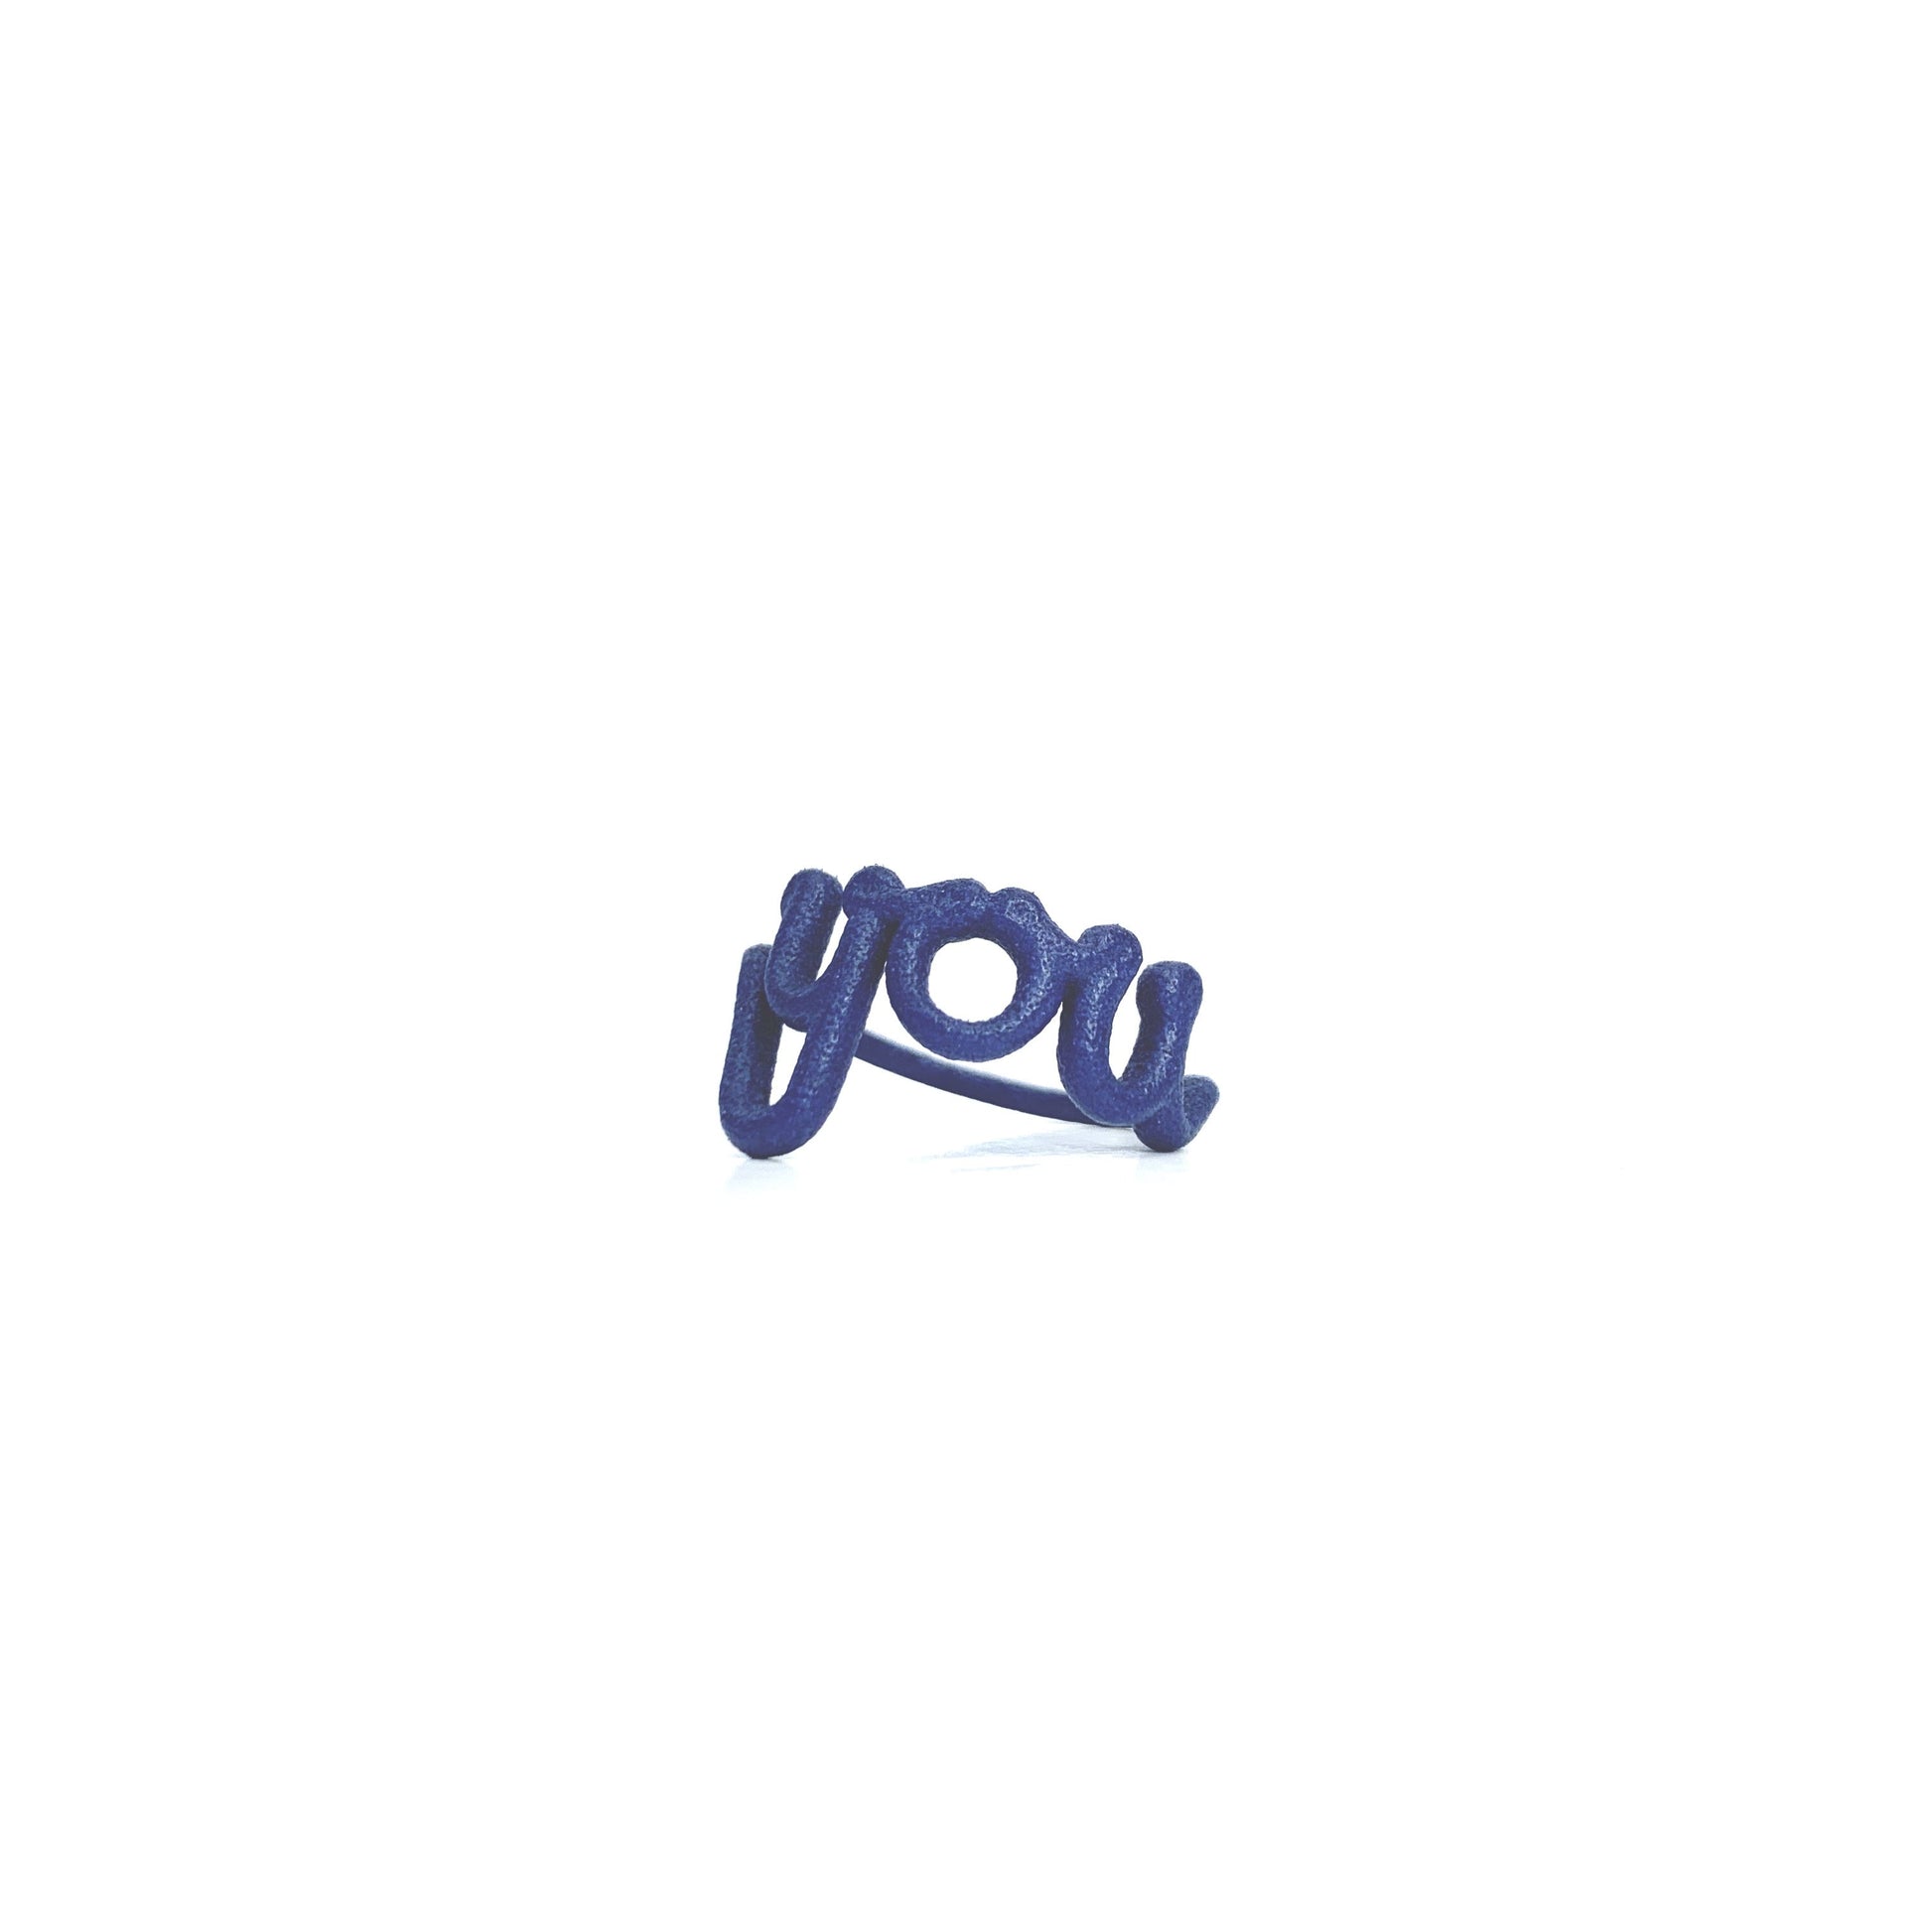 Zoe sherwood The Original This Is ‘You’ Statement Ring navy